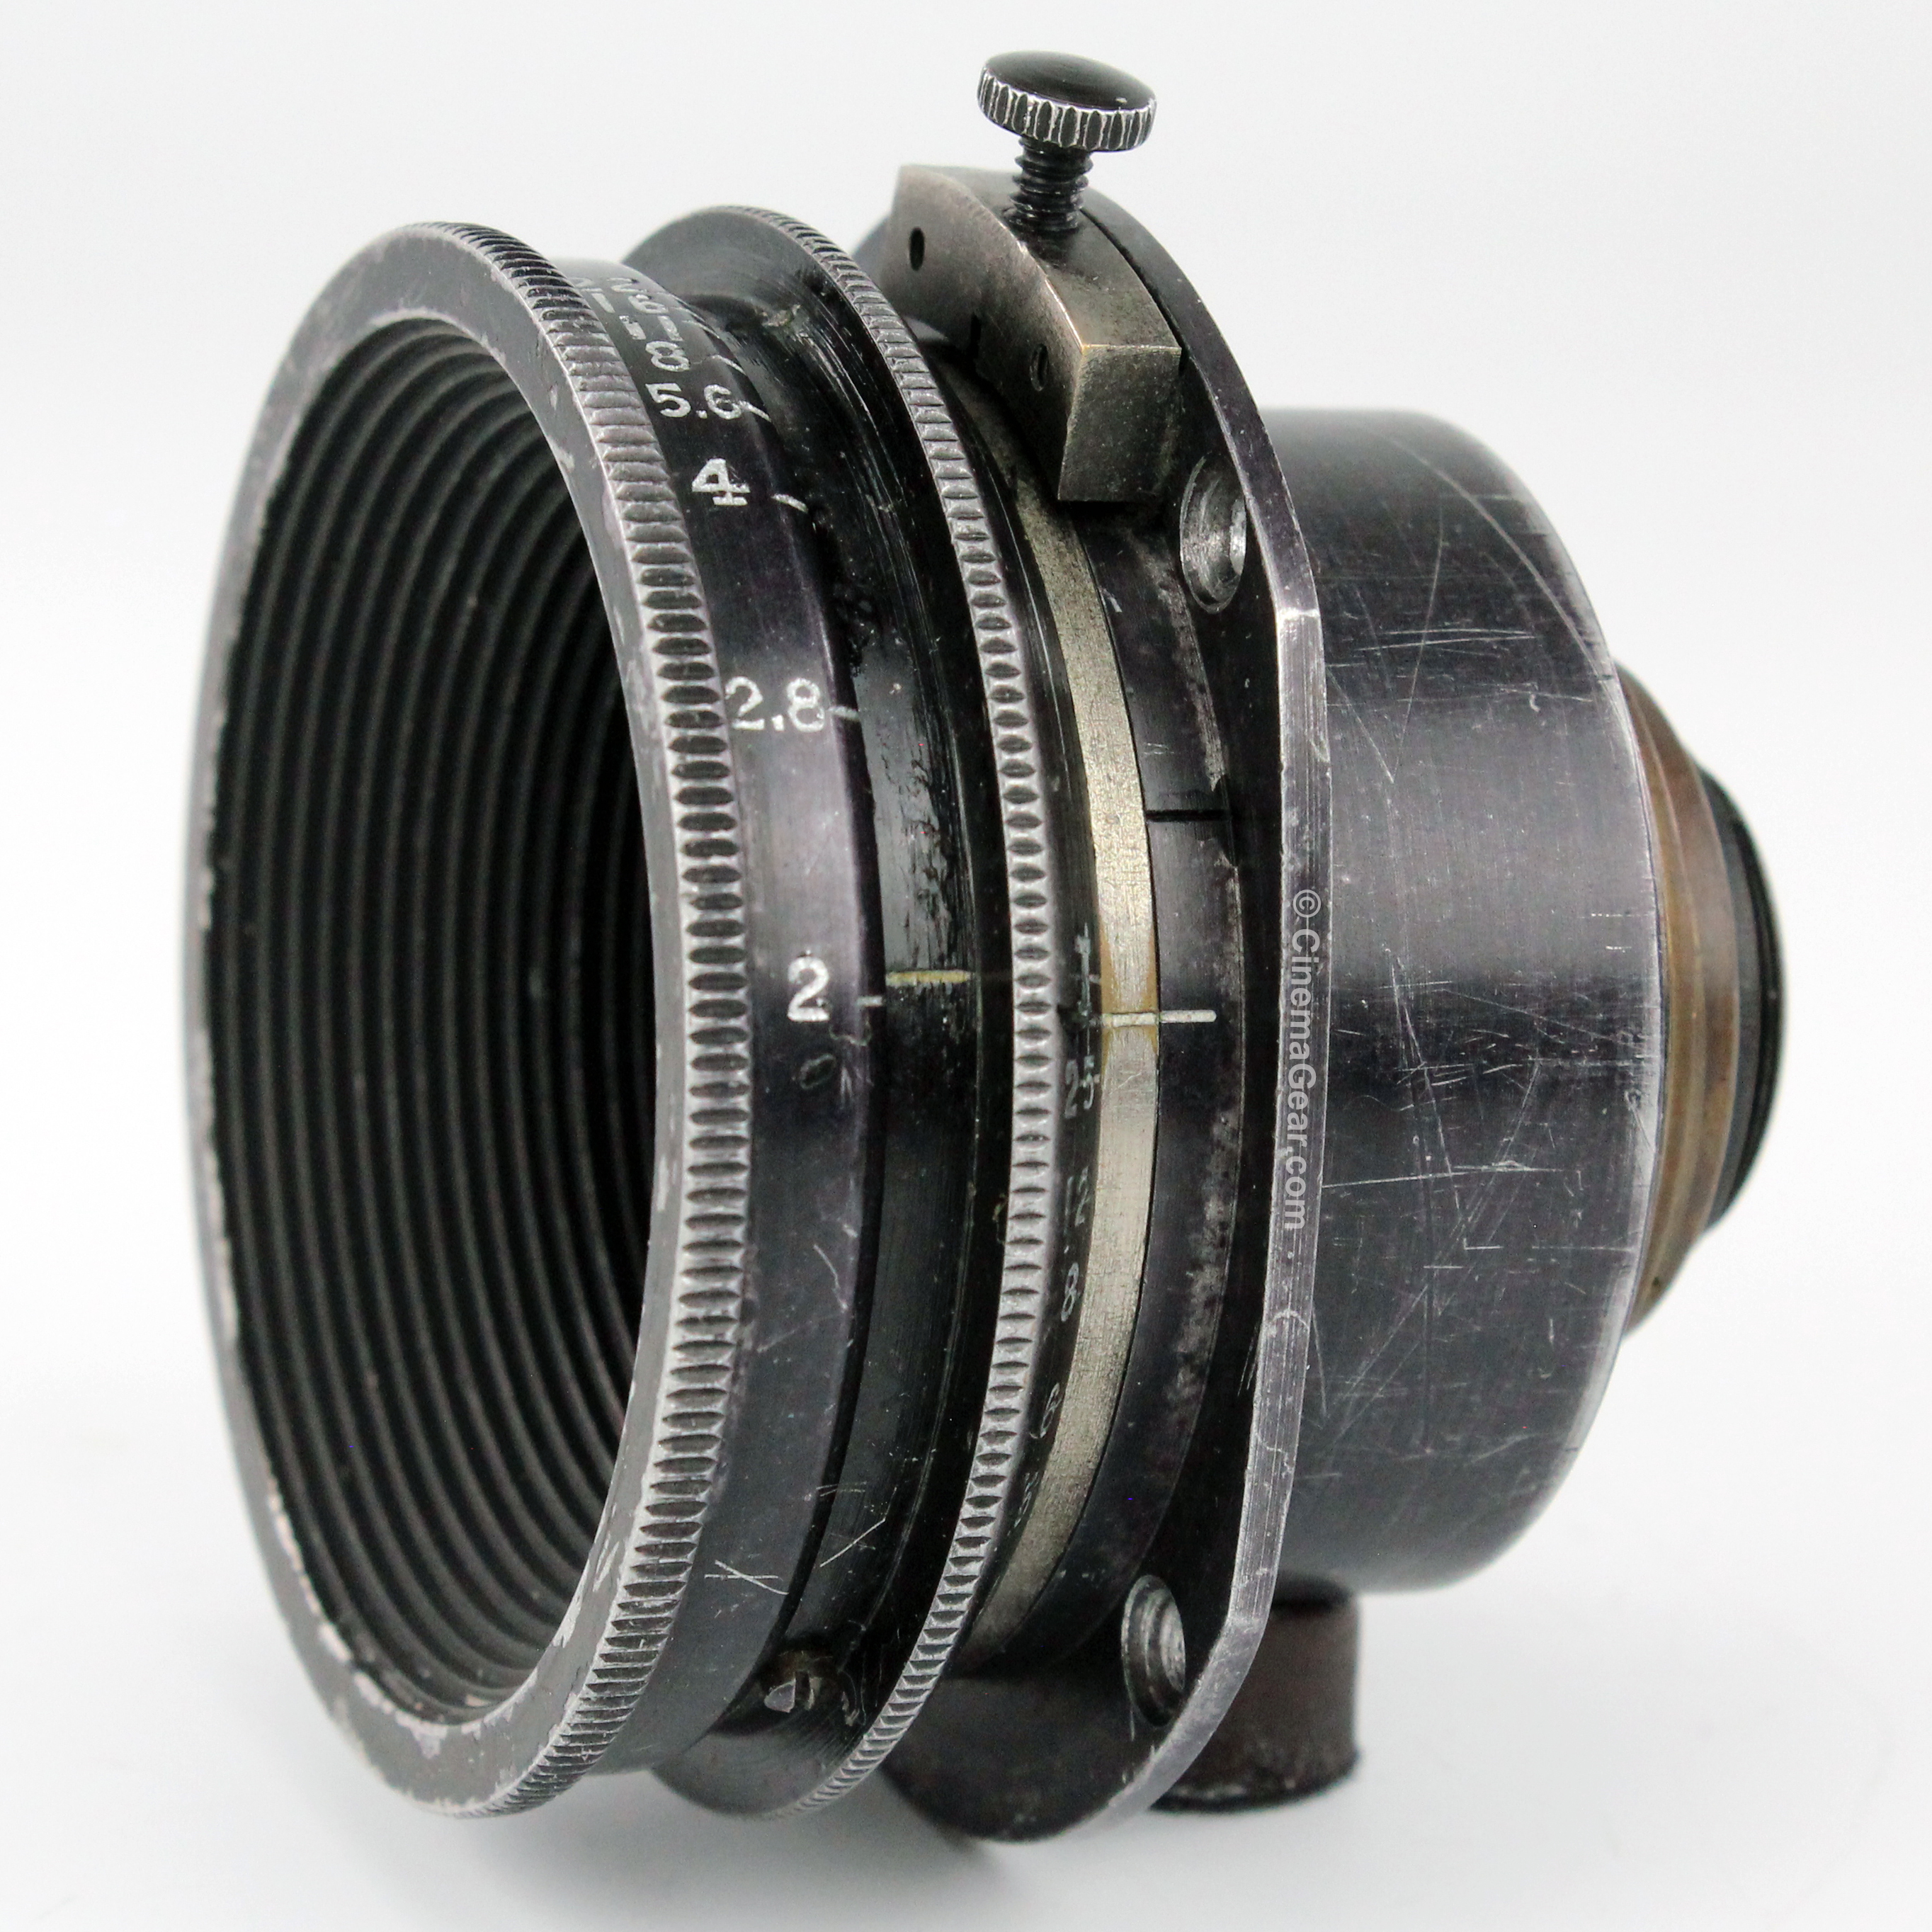 Cooke Speed Panchro 1in f2 lens in Mitchell Standard mount.